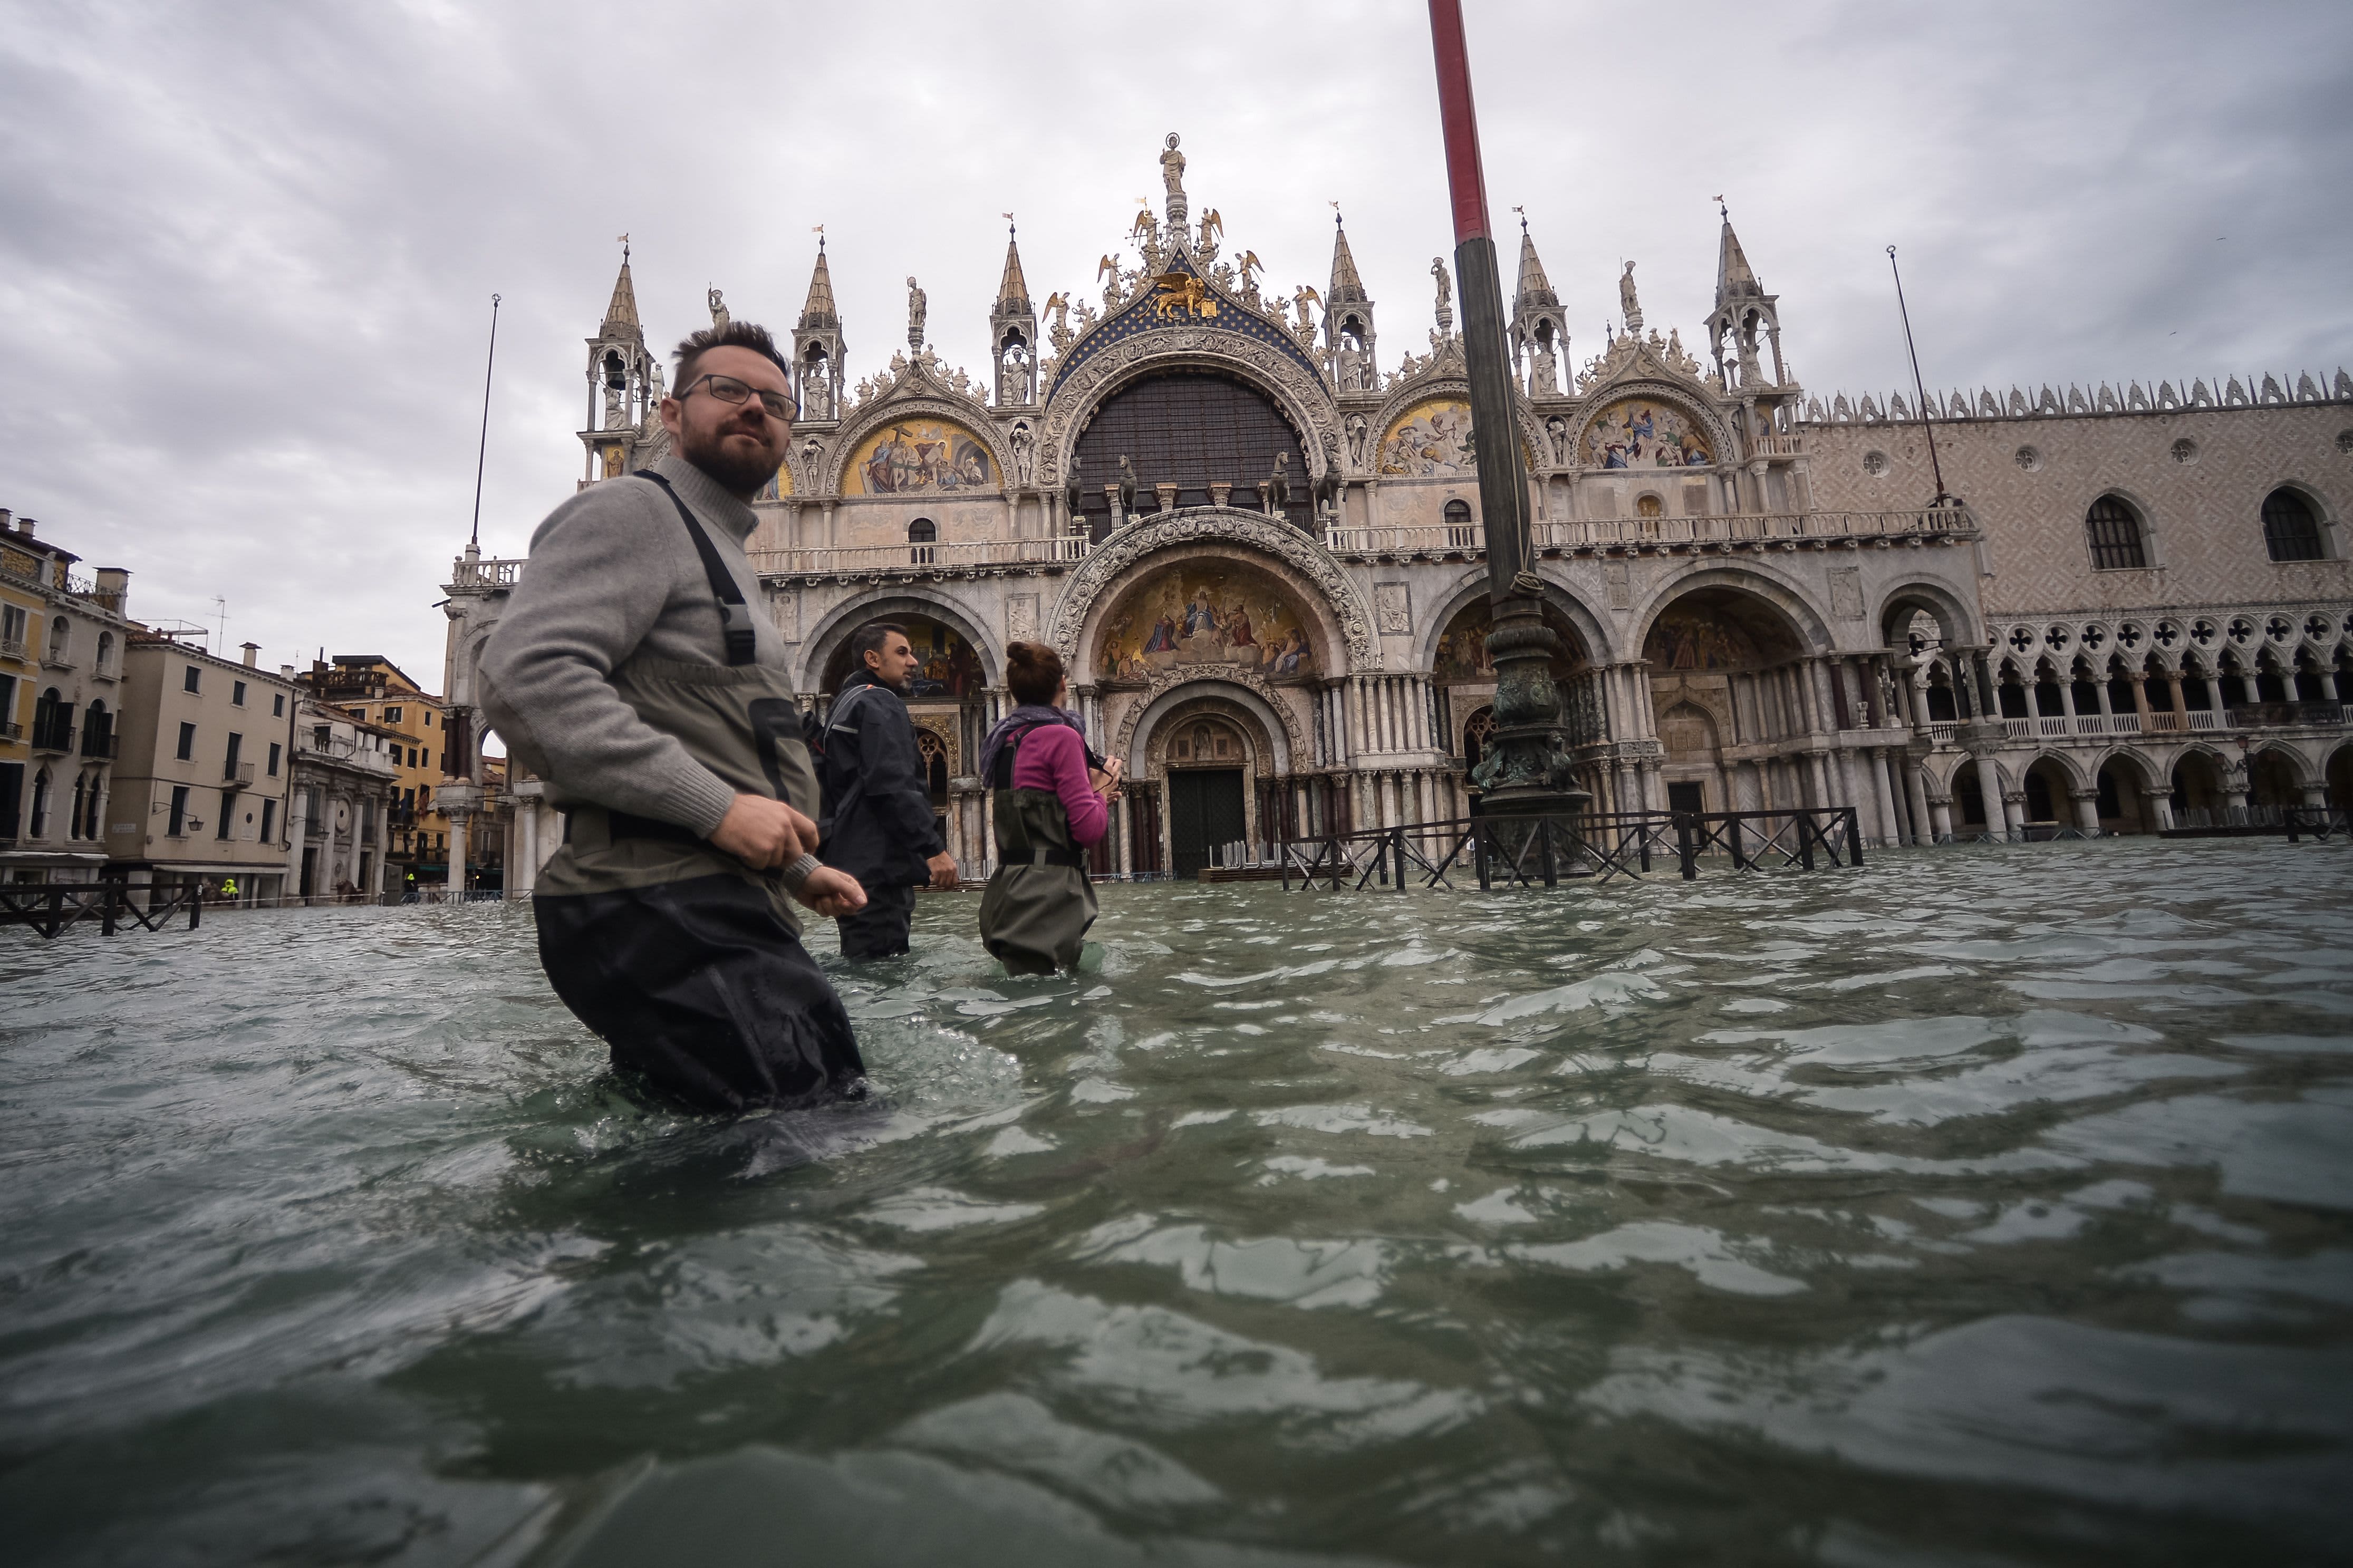 Venice hit by another ferocious high tide, flooding city